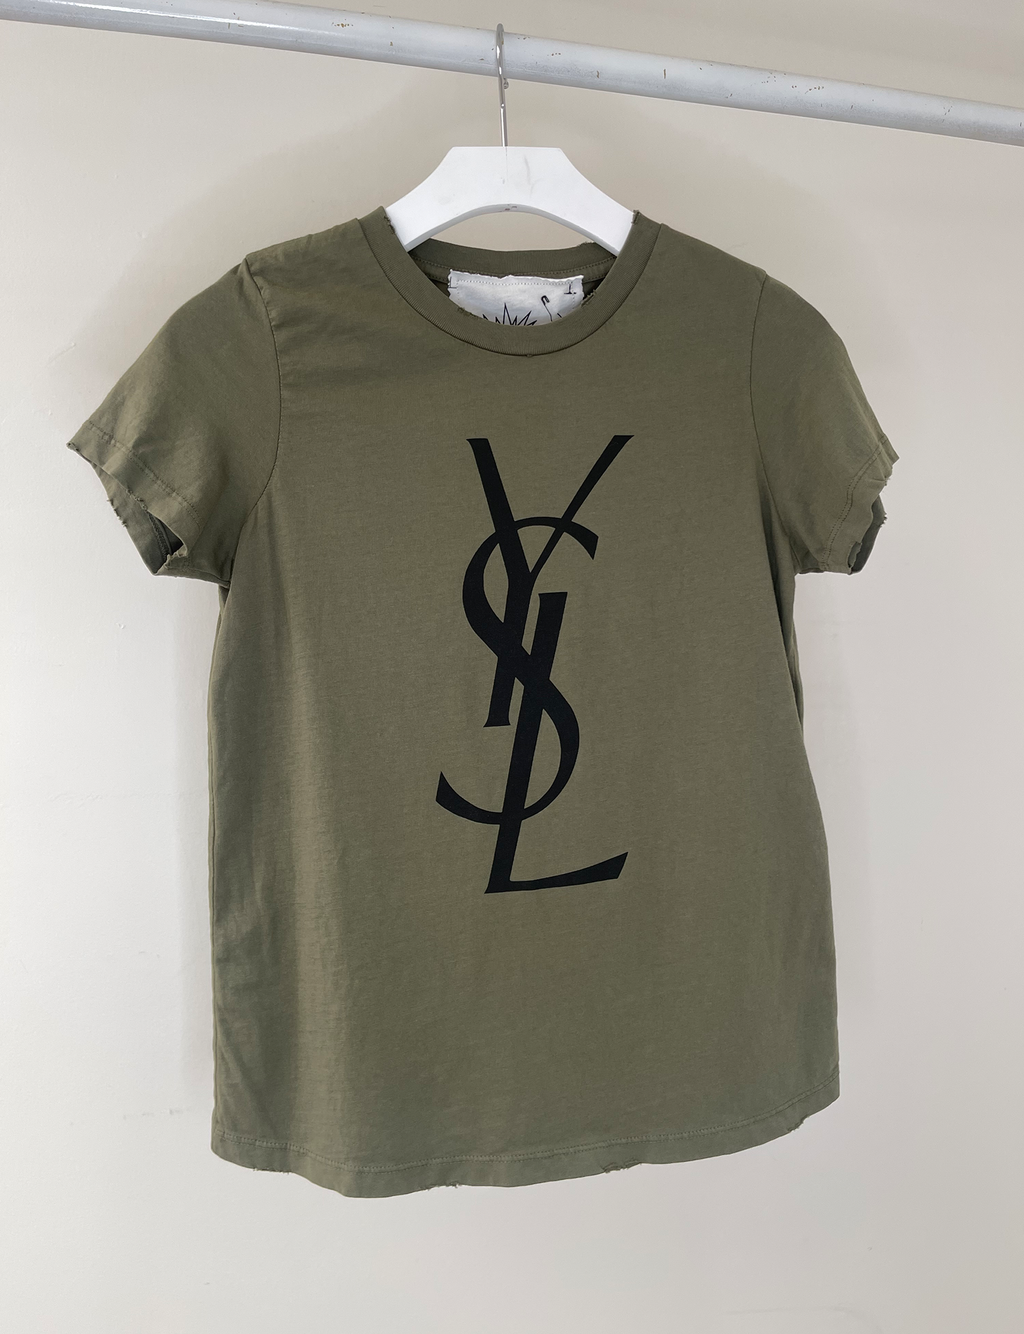 YSL Womens Fit Tee, Olive